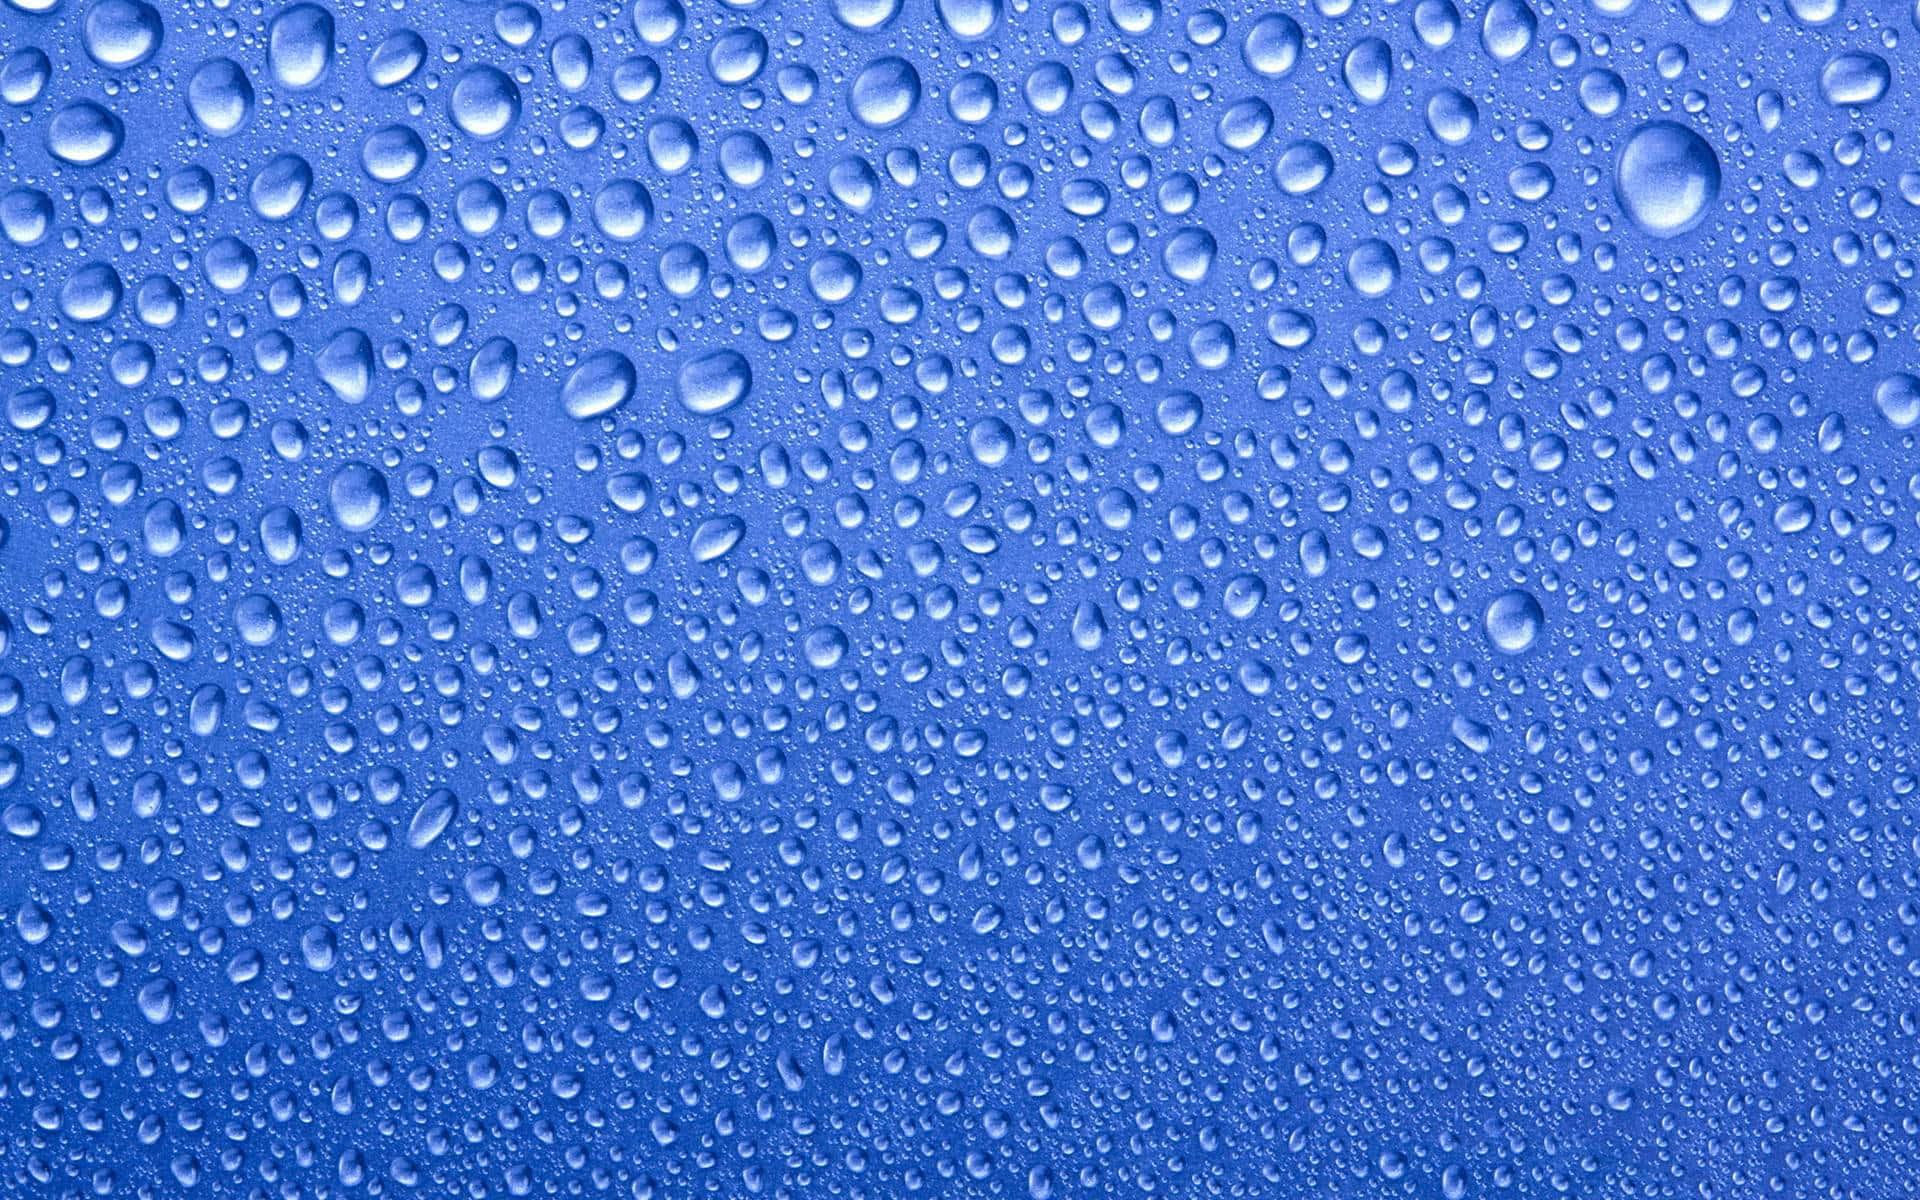 A clear droplet of water against a light background